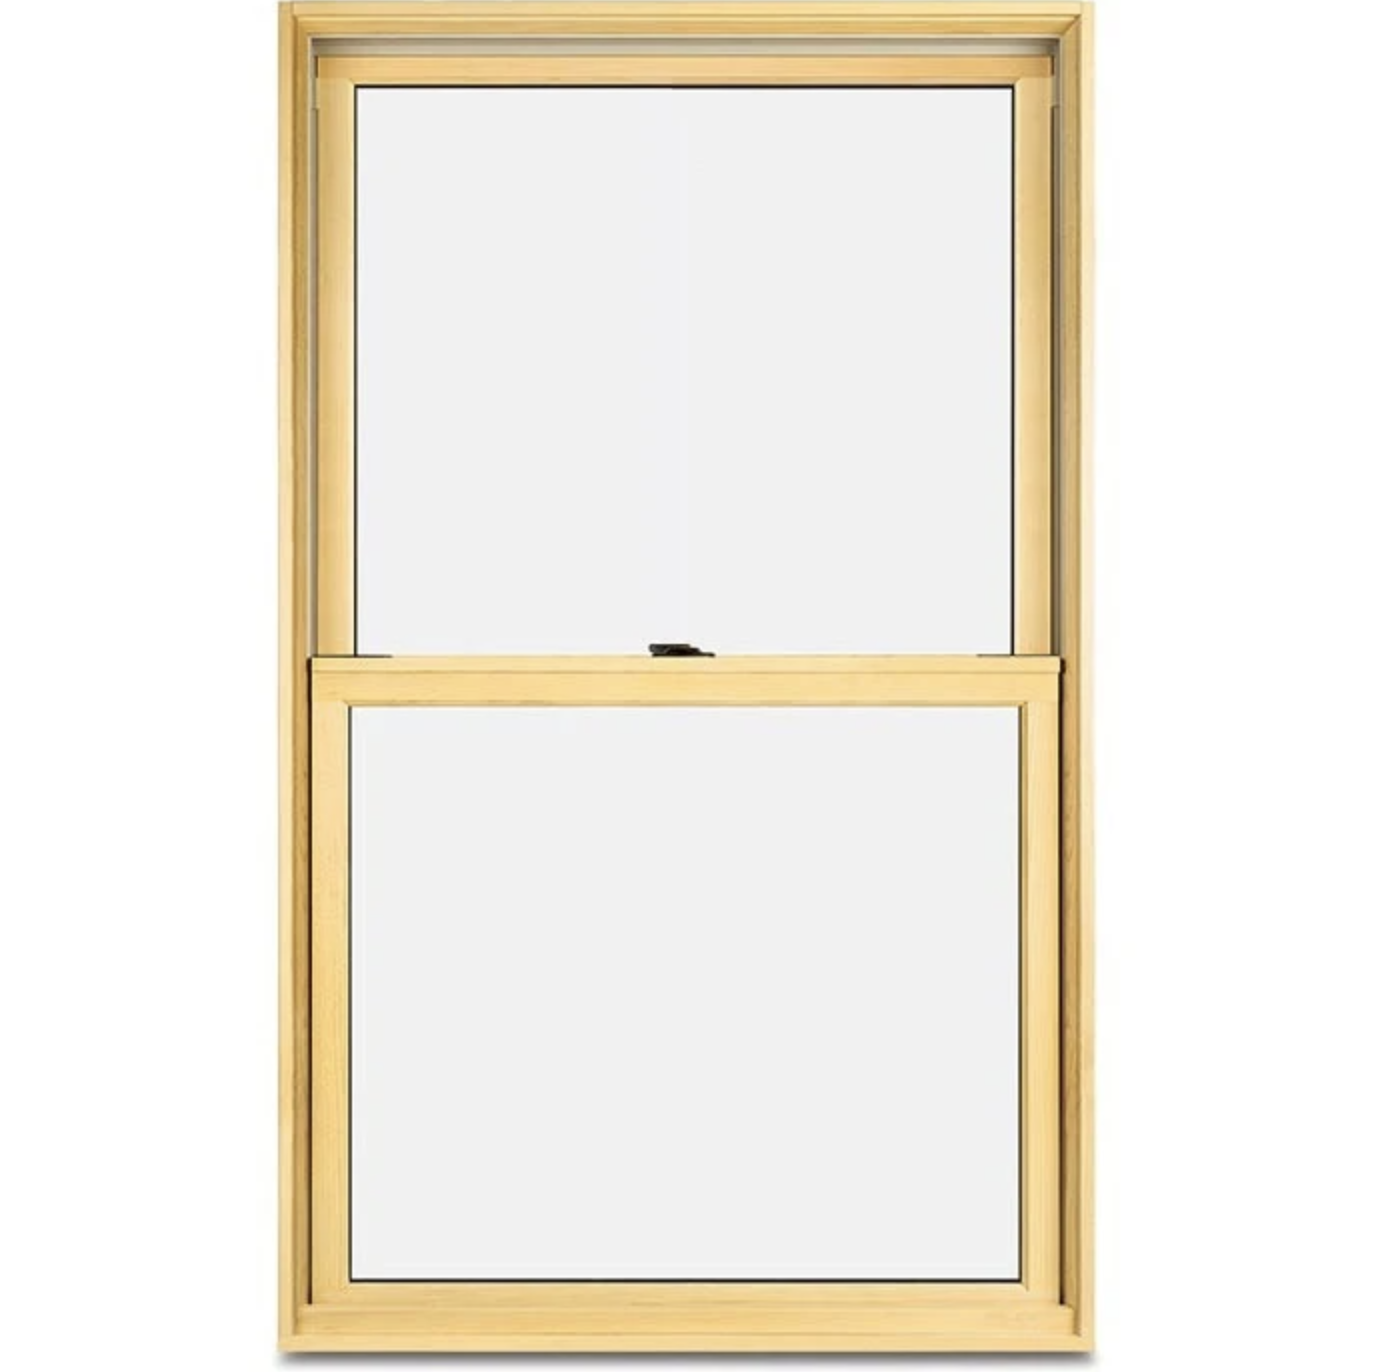 Marvin’s Wood Double-Hung Windows